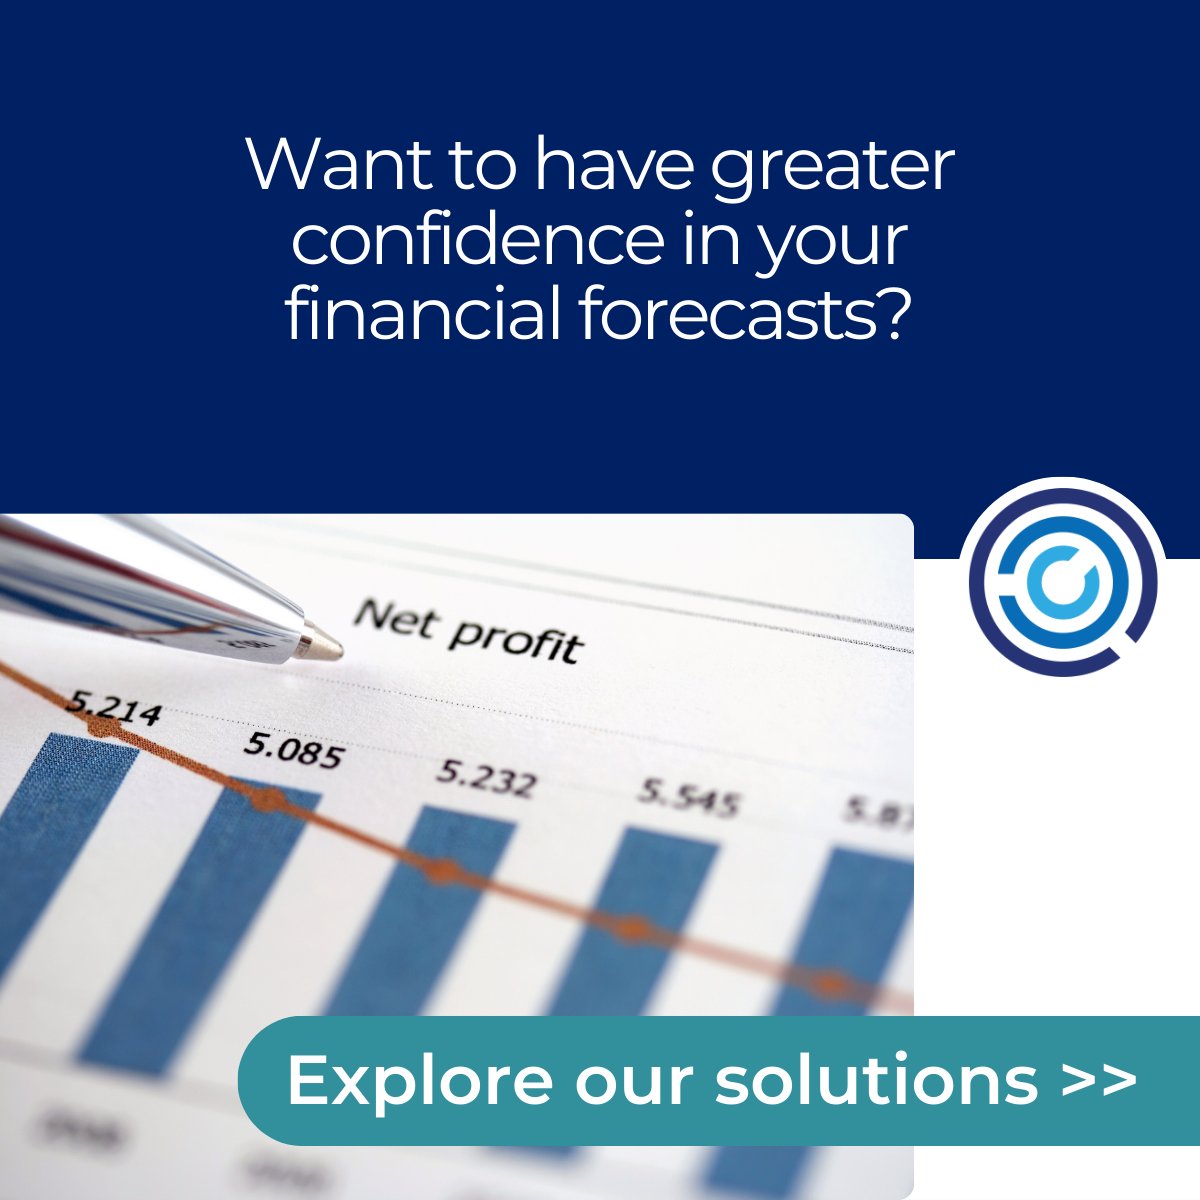 Want more confidence in your financial forecasts? Create a “single version of the truth” + reduce errors by centralising your financial and operational data. Improve the efficiency and effectiveness of your #forecasting cycle: concentricsolutions.com/solutions/fina… #datatruth #datamanagement